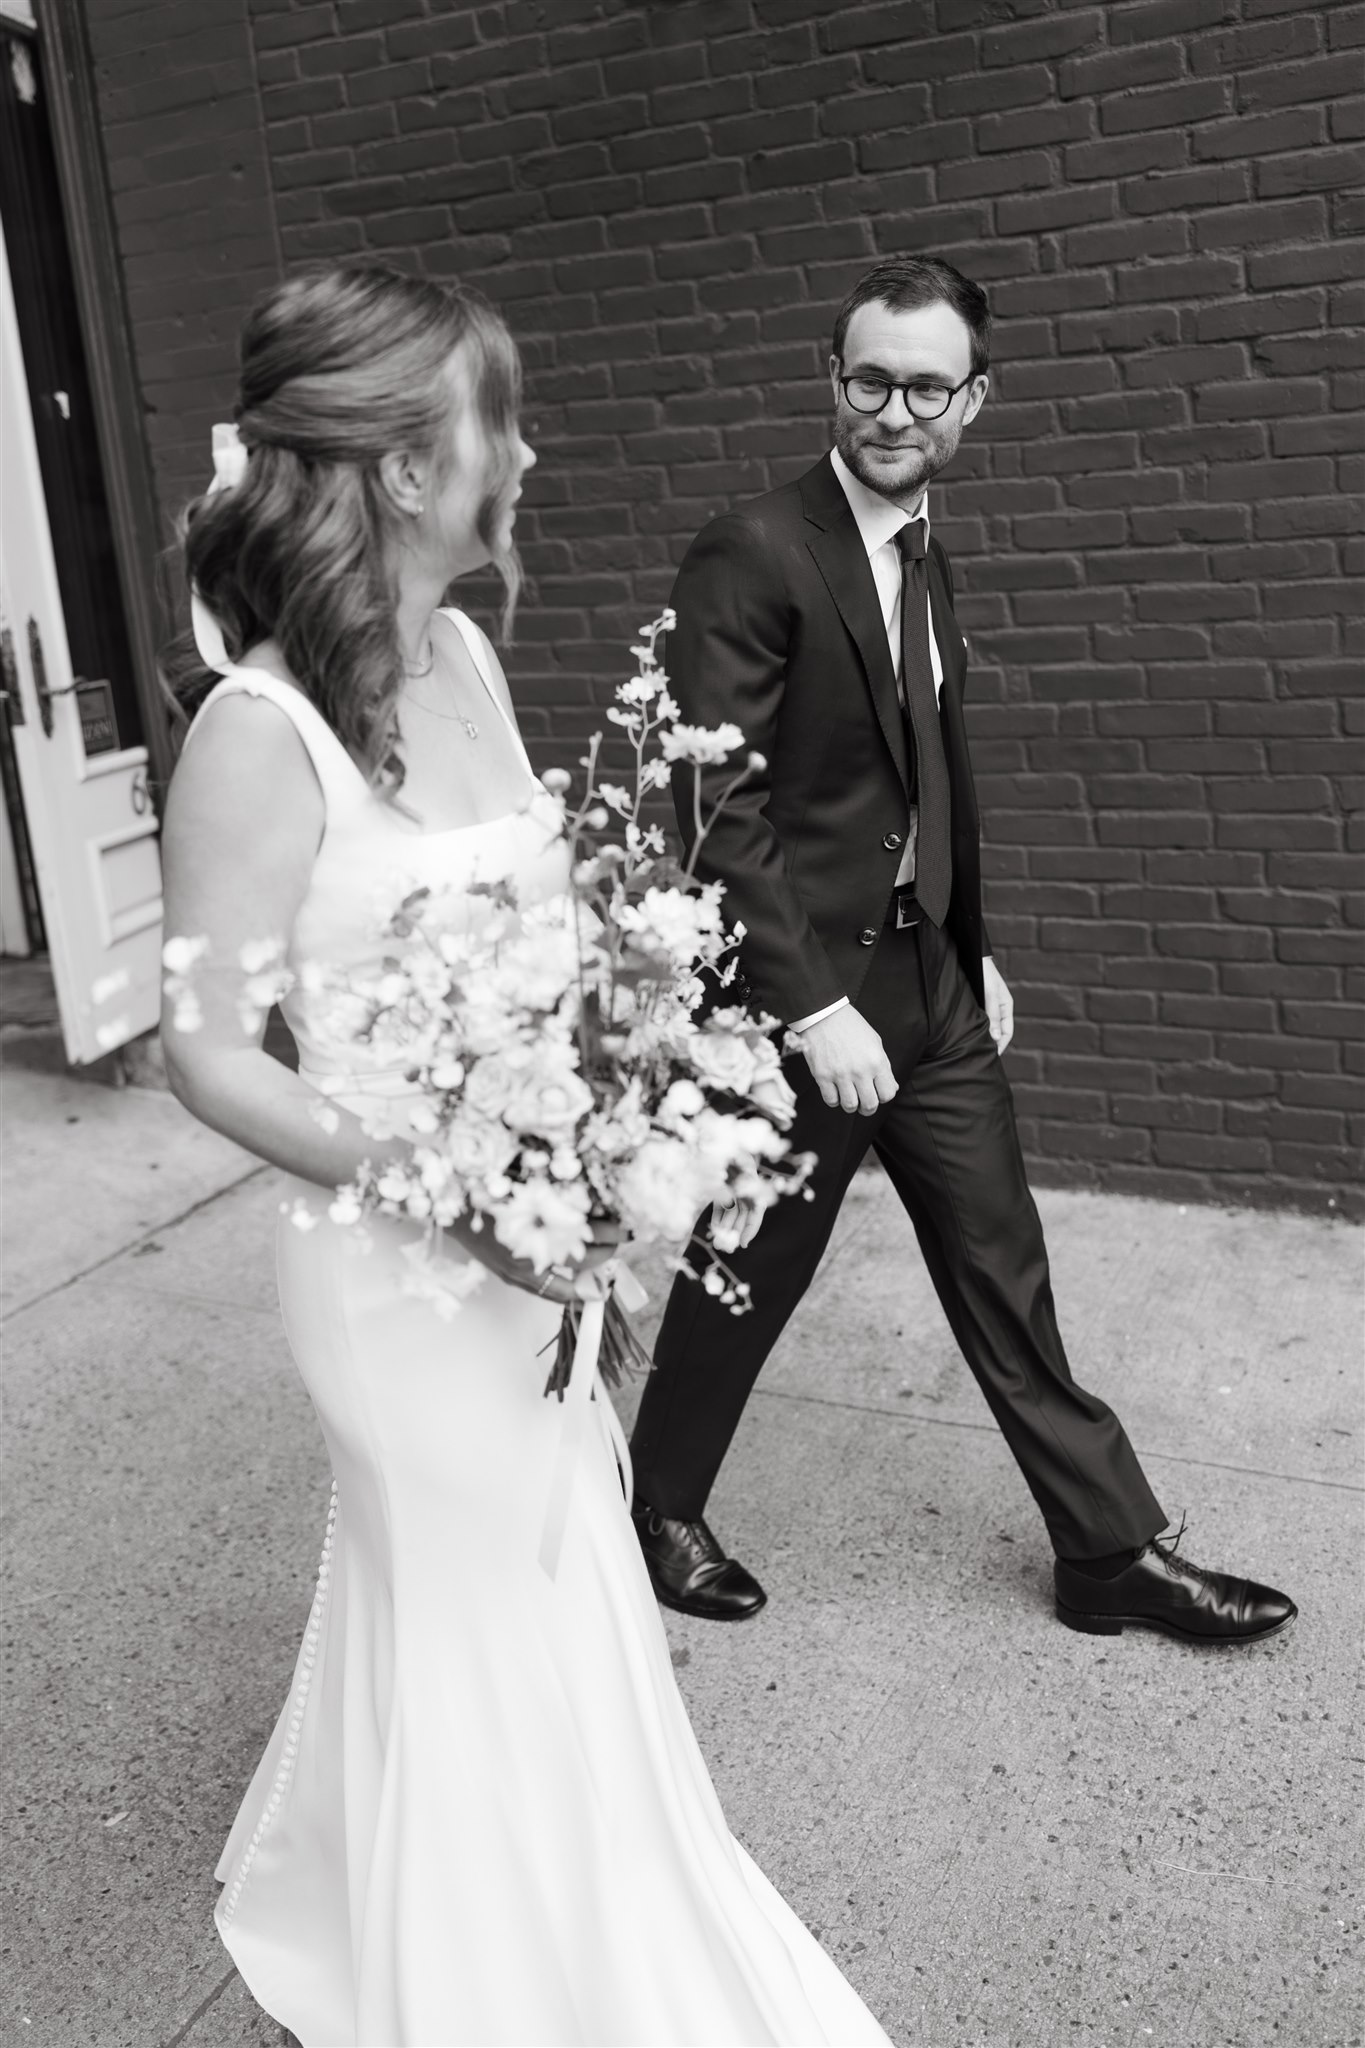 A bride and groom smiling at each other while walking across a city street, the bride holding a bouquet, and city buildings in the background.